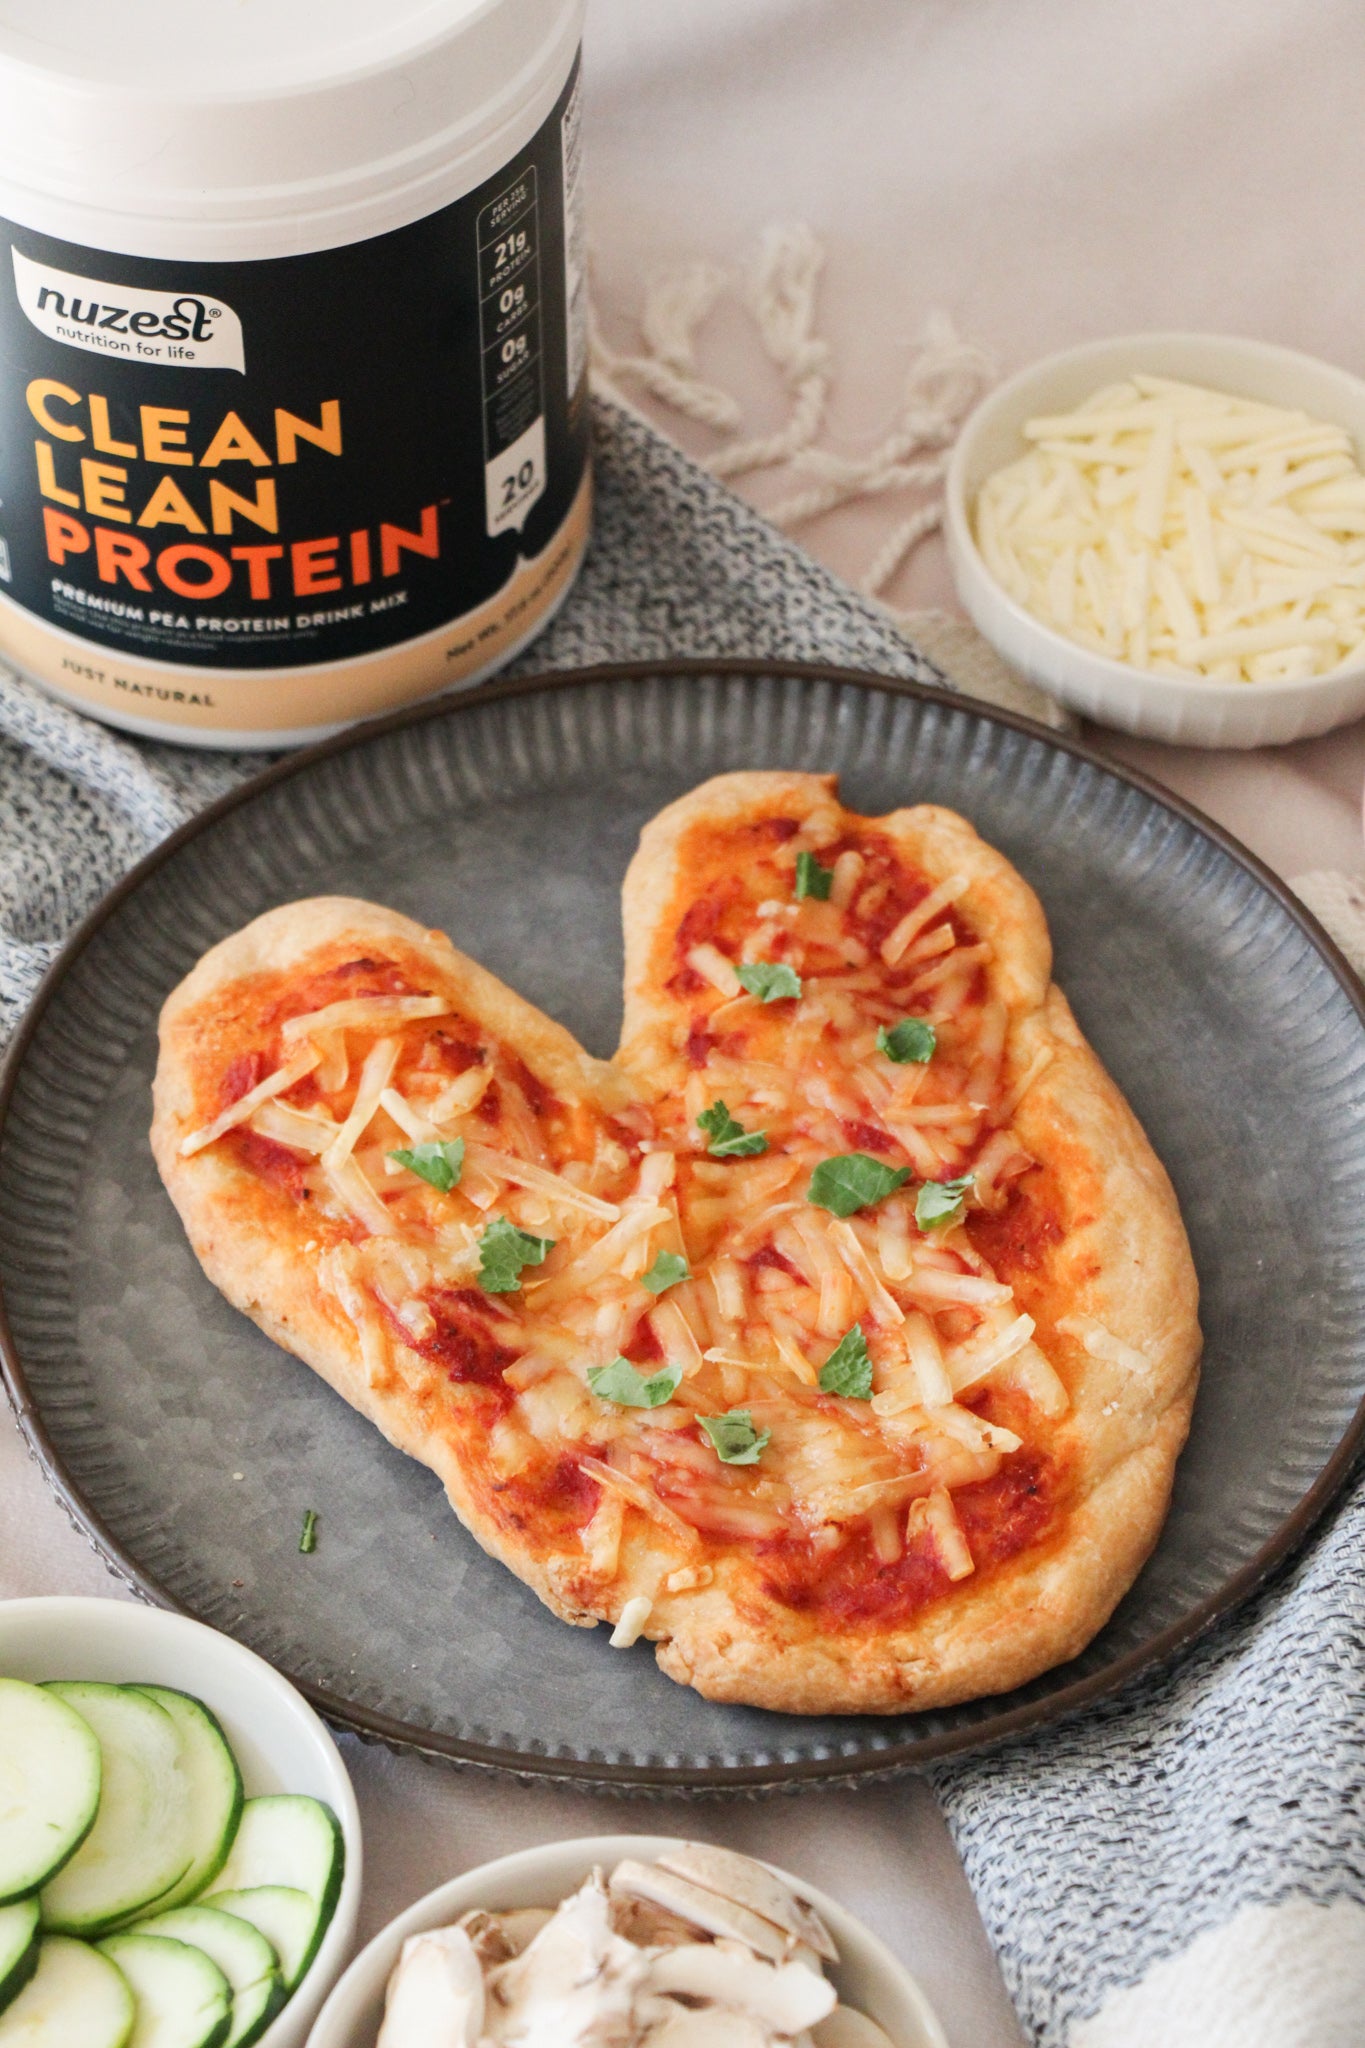 Just Natural Clean Lean Protein Pizza Dough